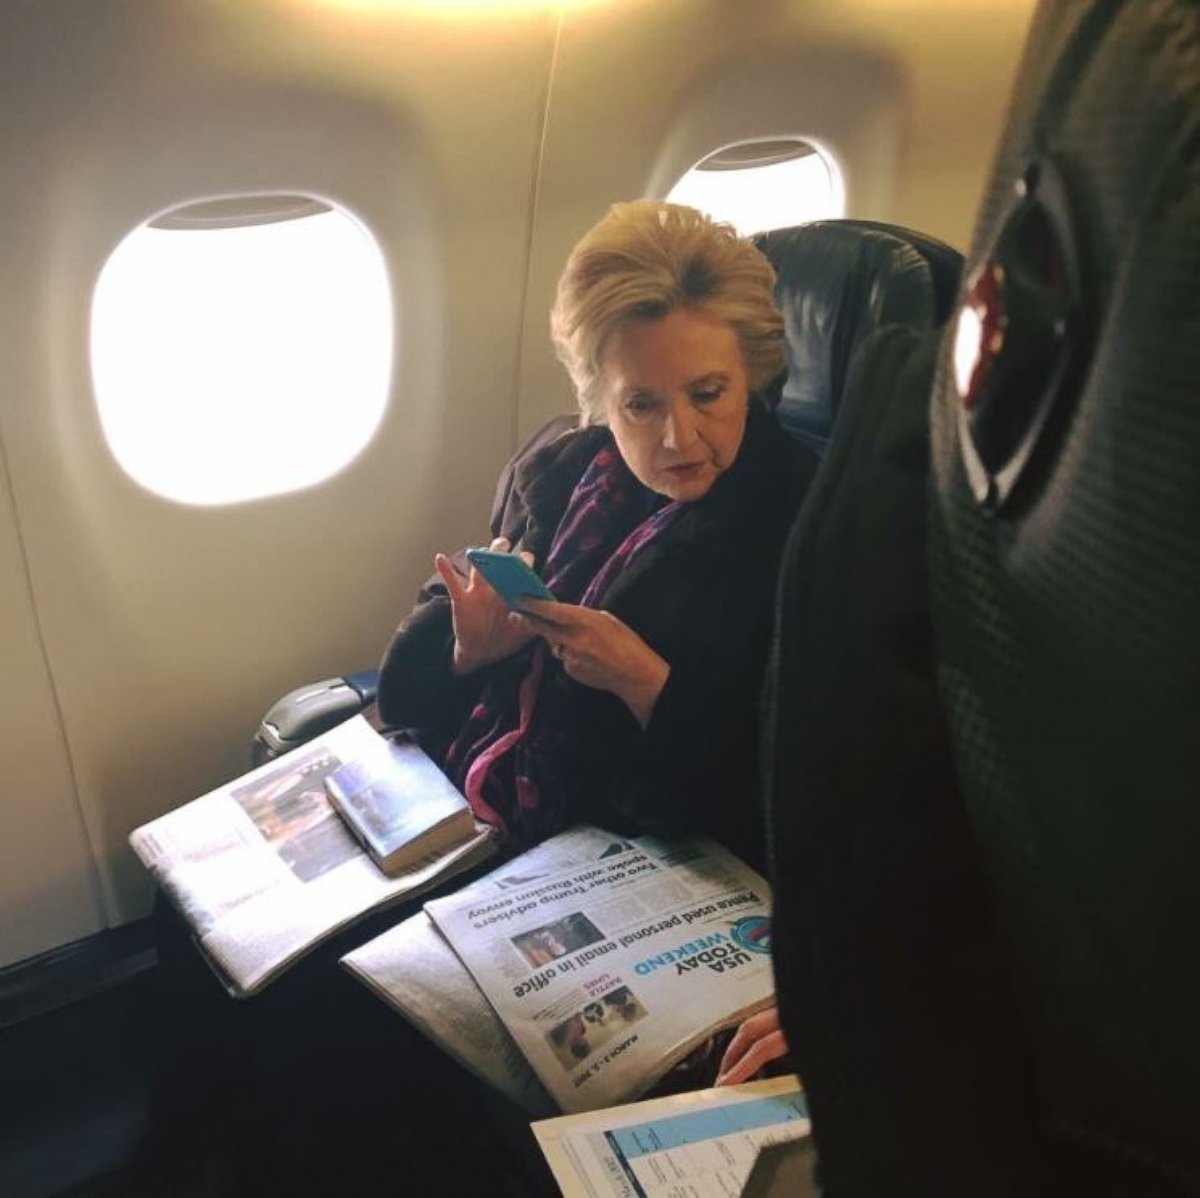 PHOTO: Hillary Clinton was photographed on March 3, 2017, by a fellow passenger on a Boston to New York flight, reading a USA Today cover story about Mike Pence''''s use of personal email while governor of Indiana.